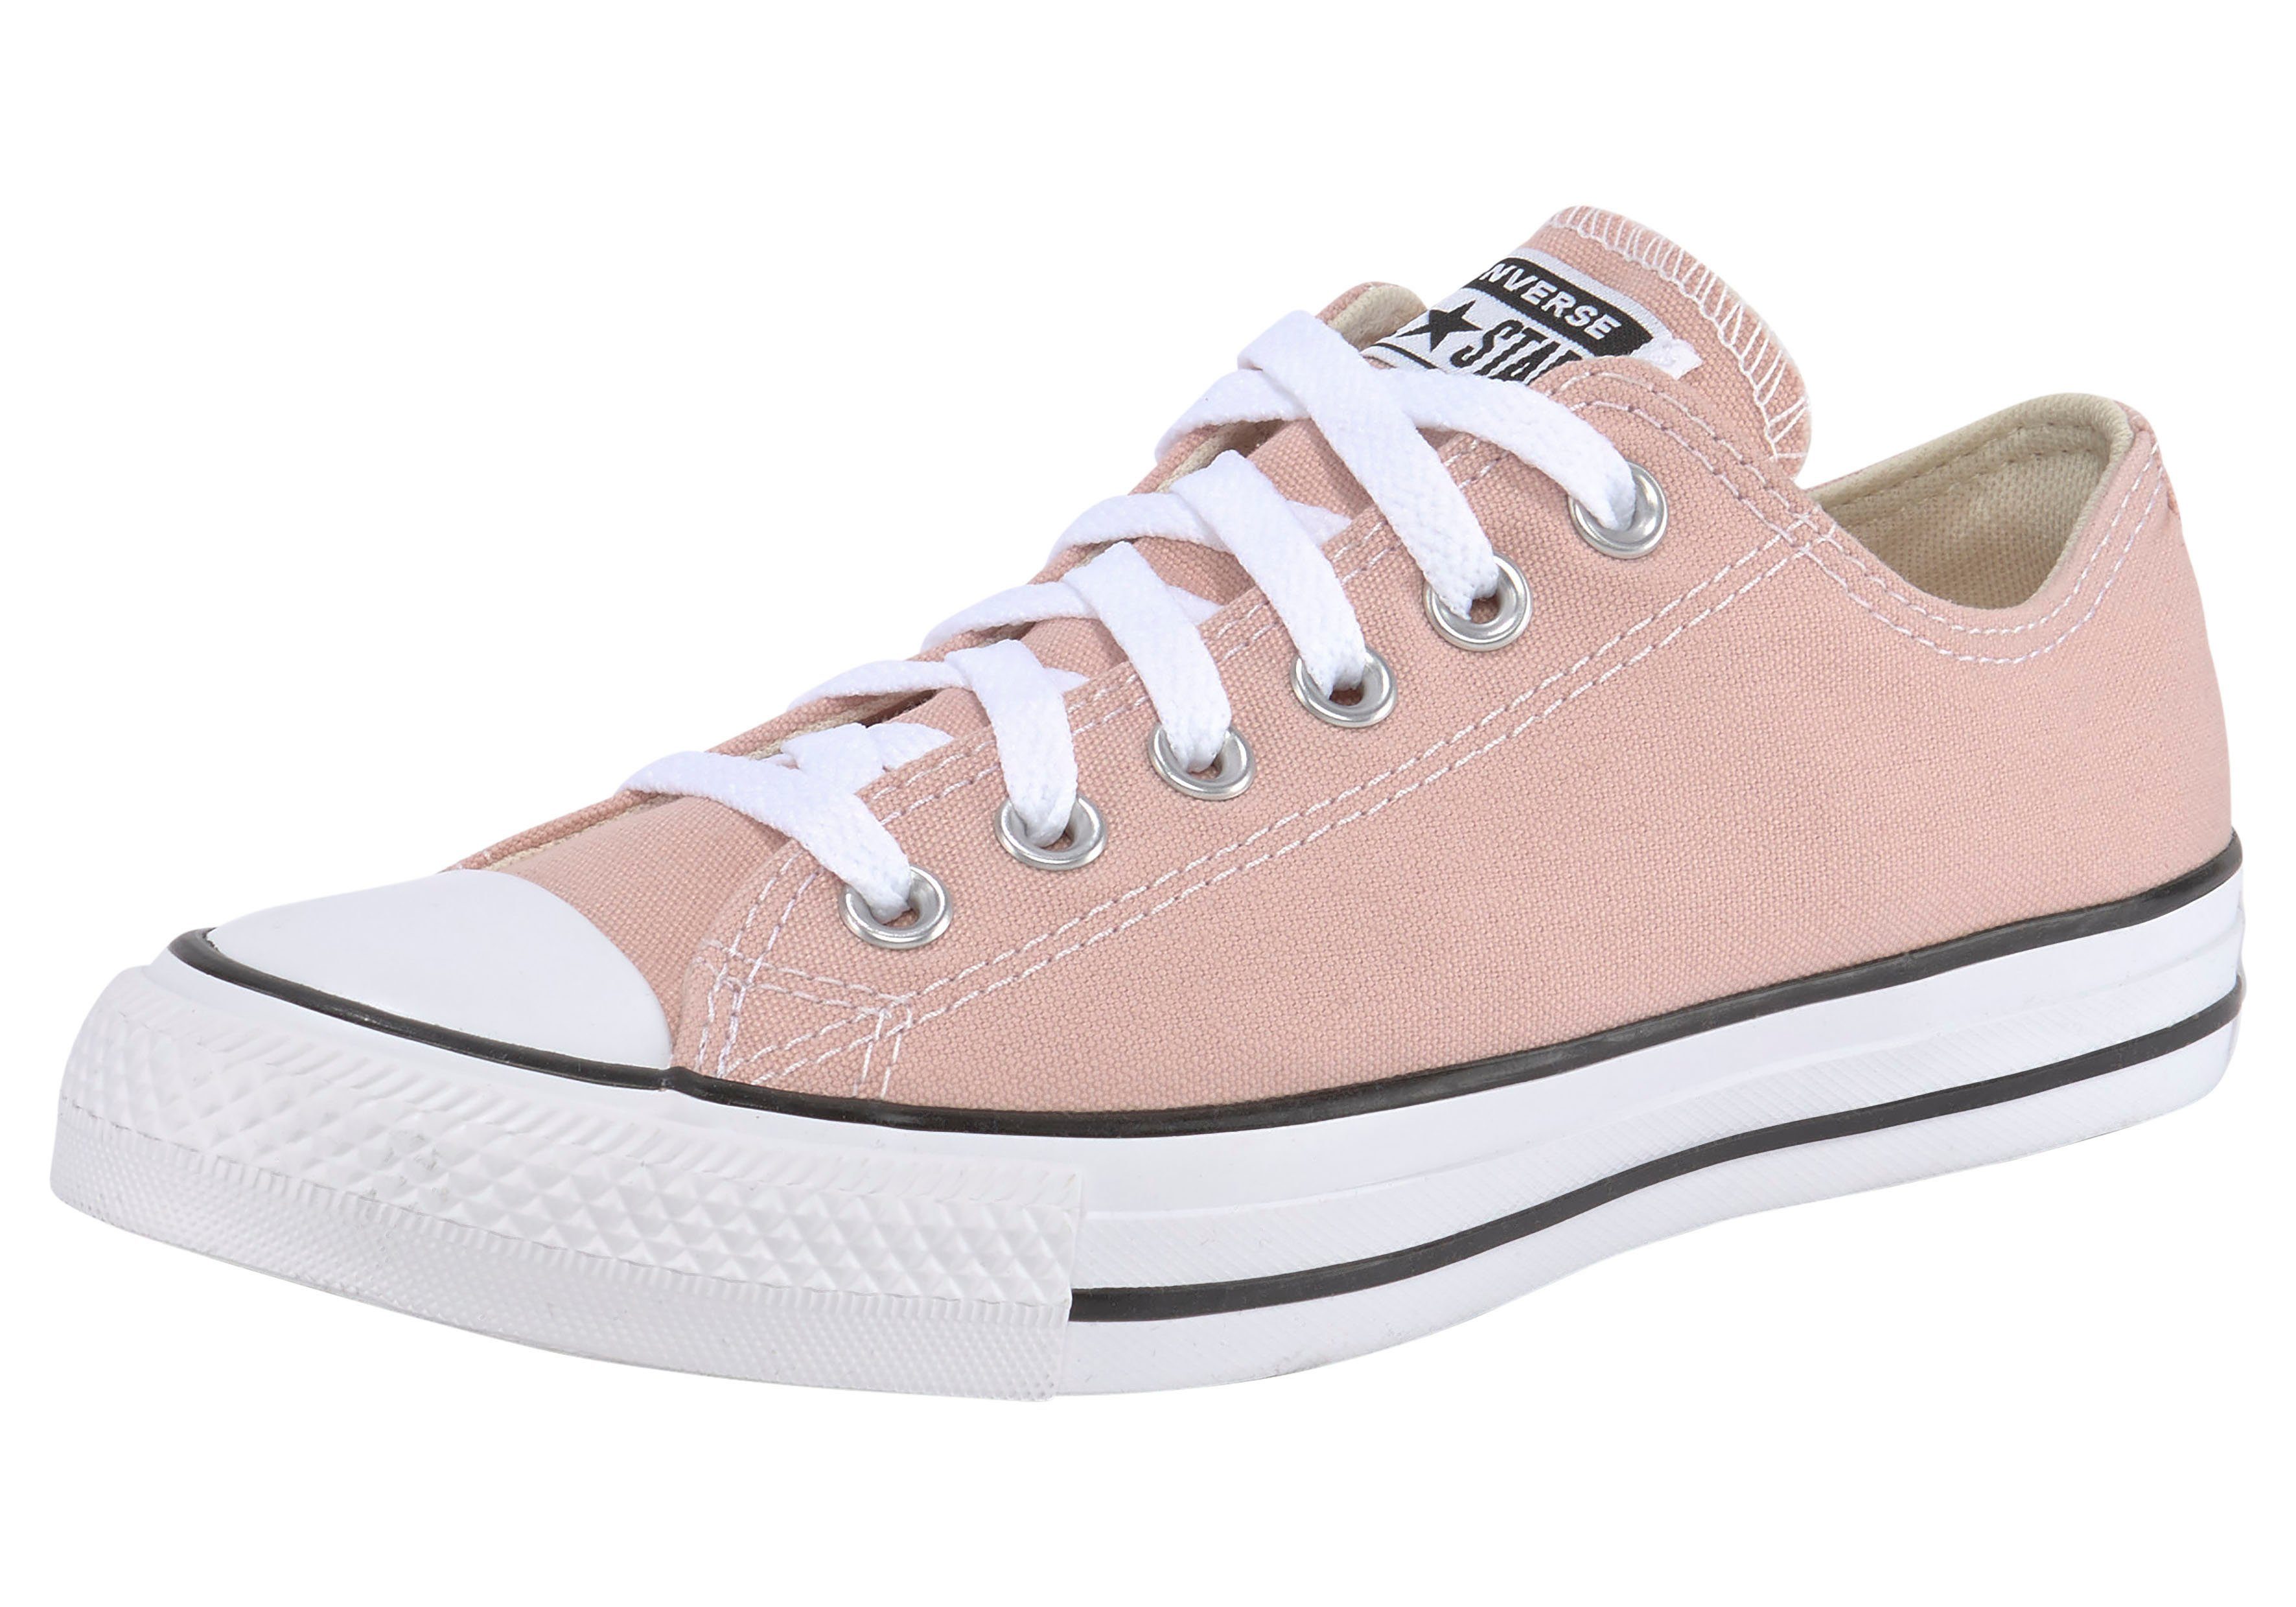 Converse »Chuck Taylor All Star PARTIALLY RECYCLED COTTON OX« Sneaker  online kaufen | OTTO